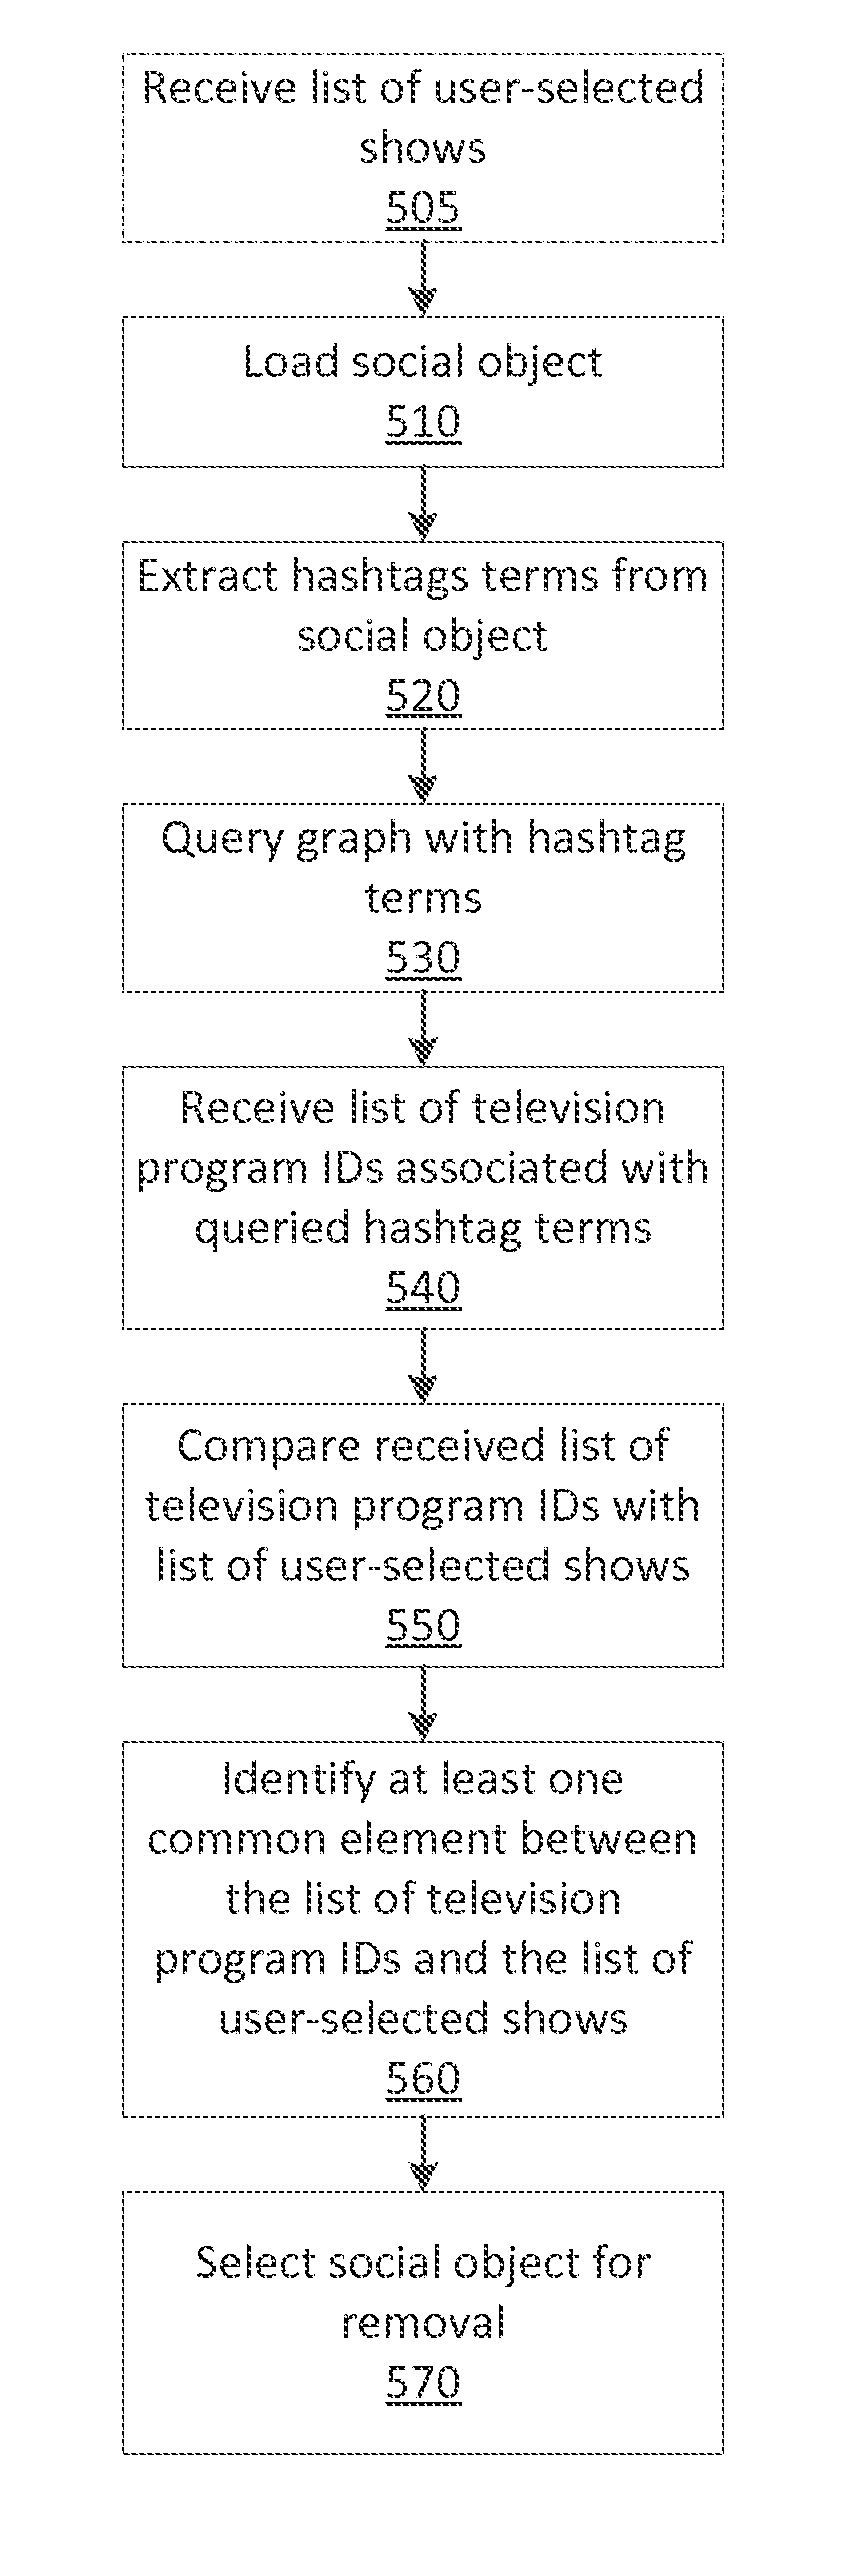 Real-Time Learning of Hashtag-to-TV Program Relationships